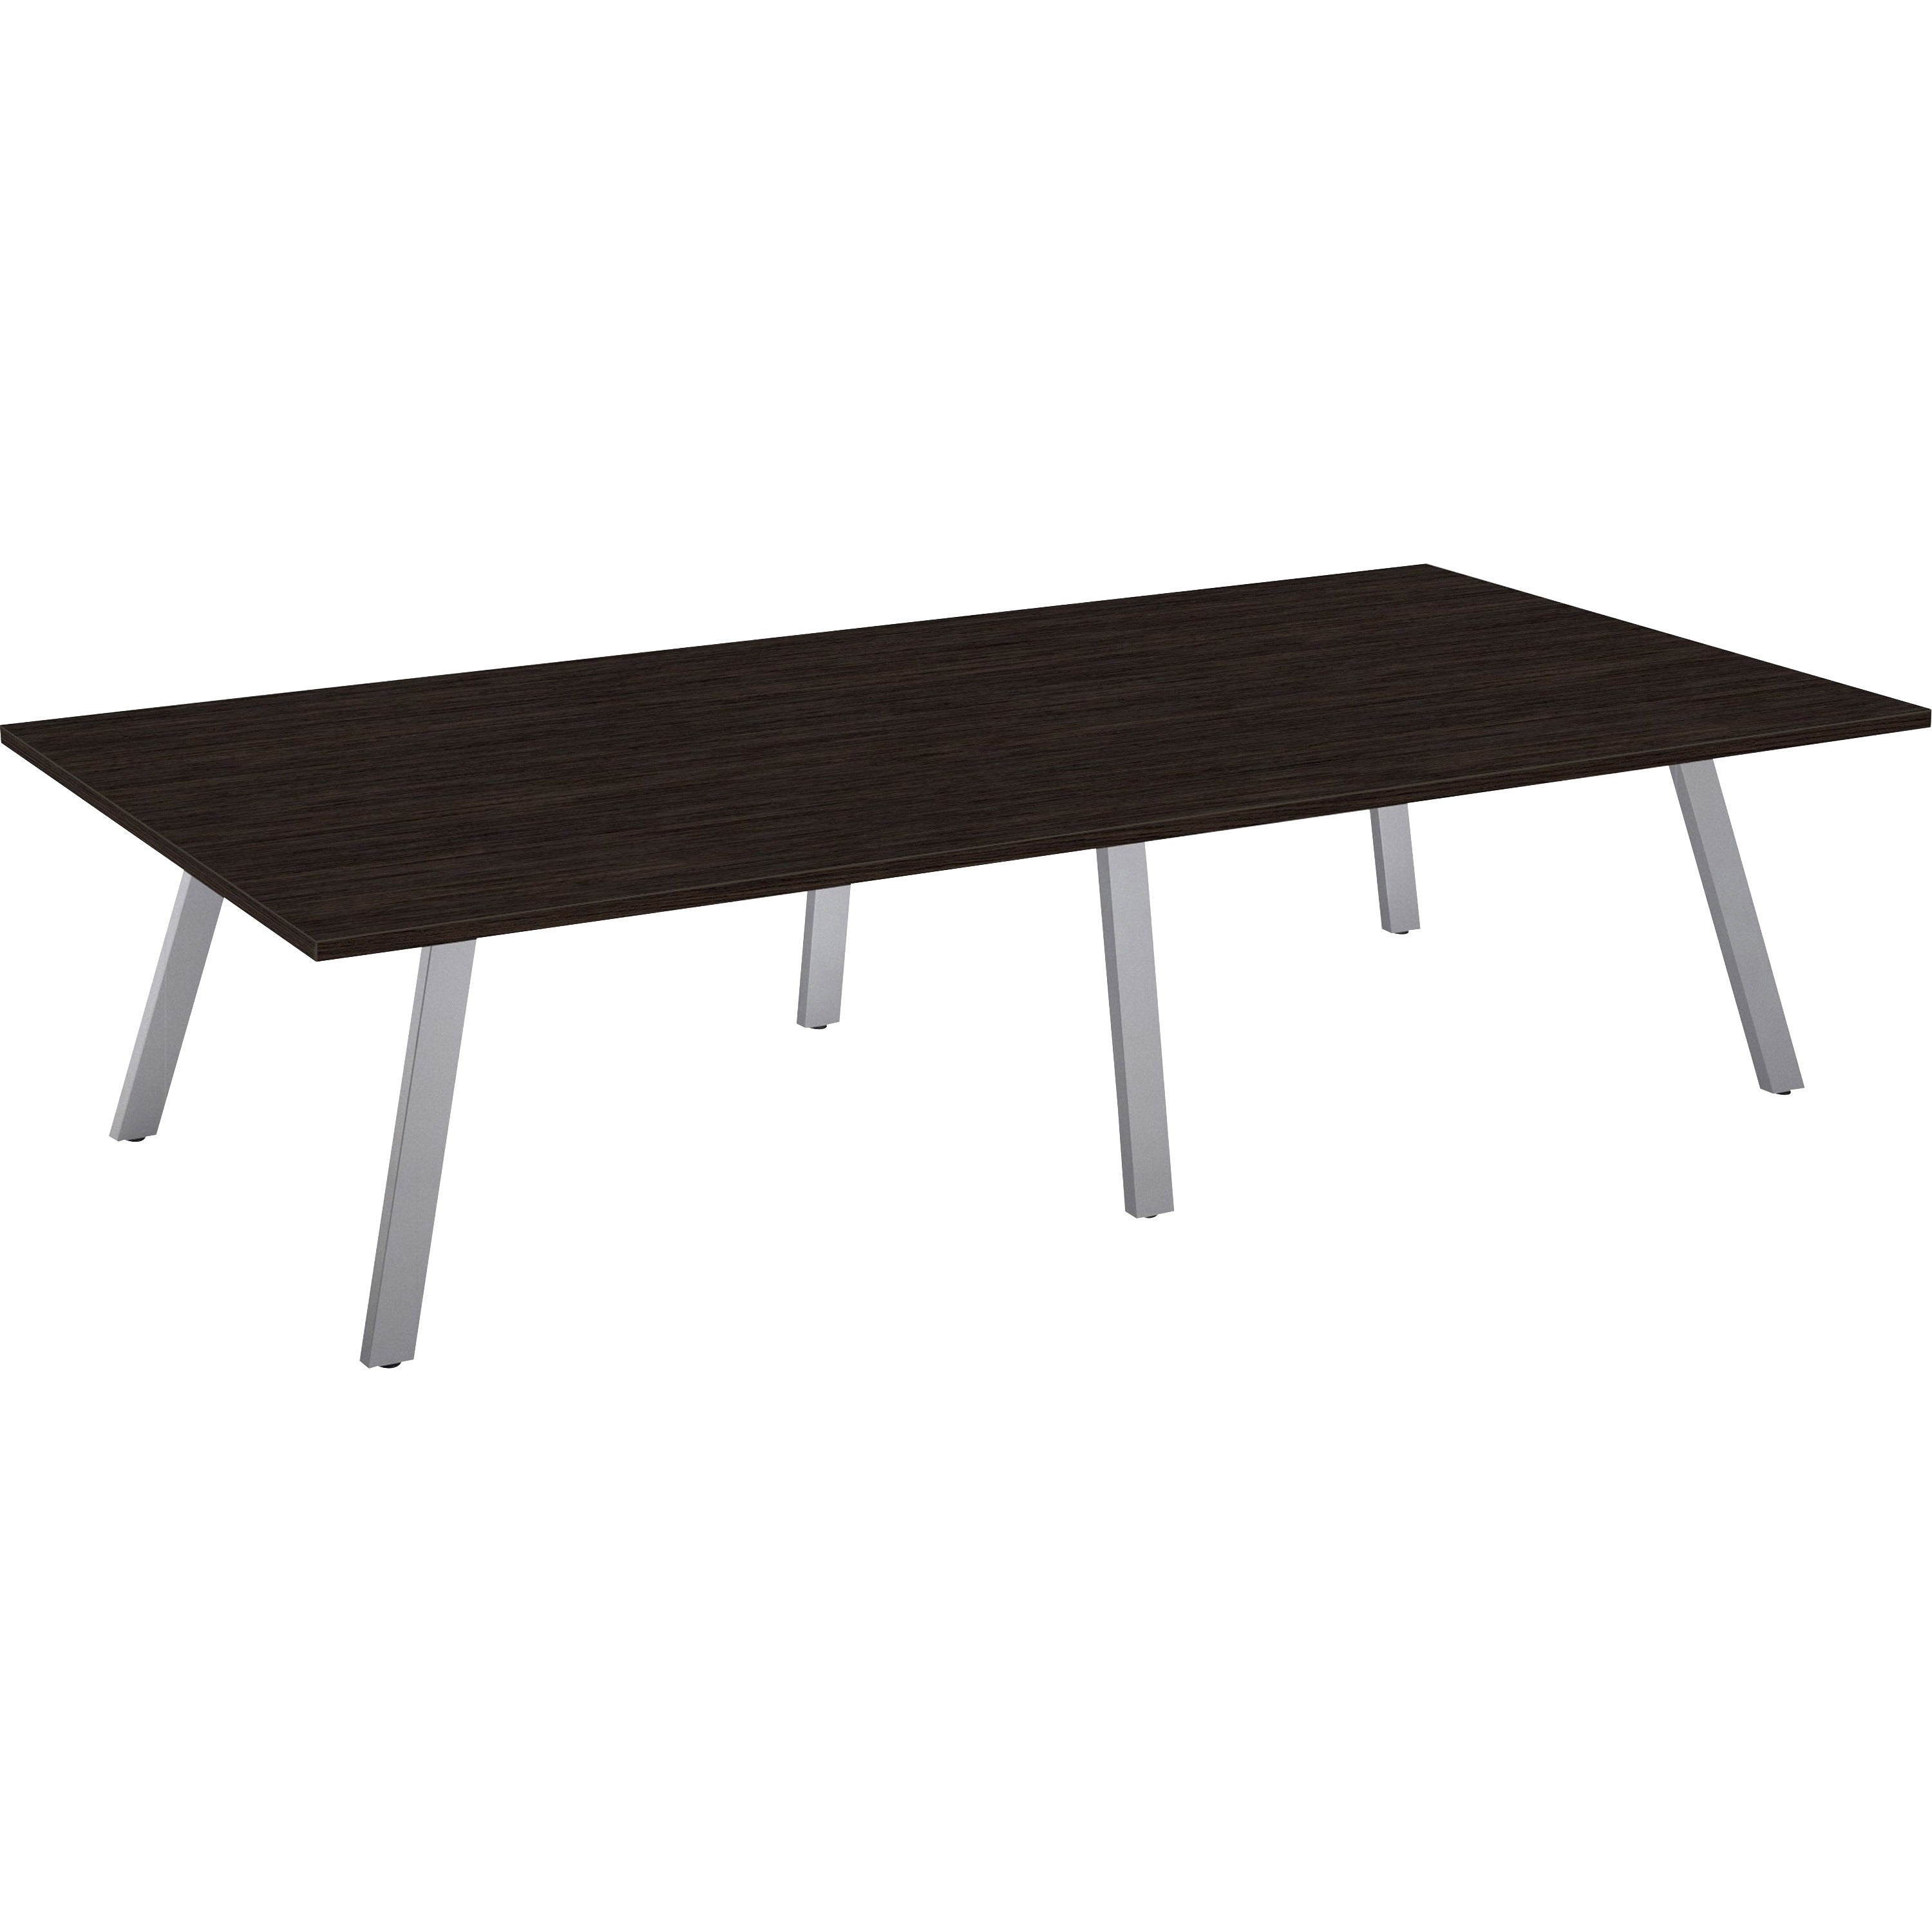 Special-T 60x120 AIM XL Conference Table - For - Table TopLaminated Top x 10 ft Table Top Width x 60" Table Top Depth - 29" Height - Assembly Required - Ebony Recon - 1 Each